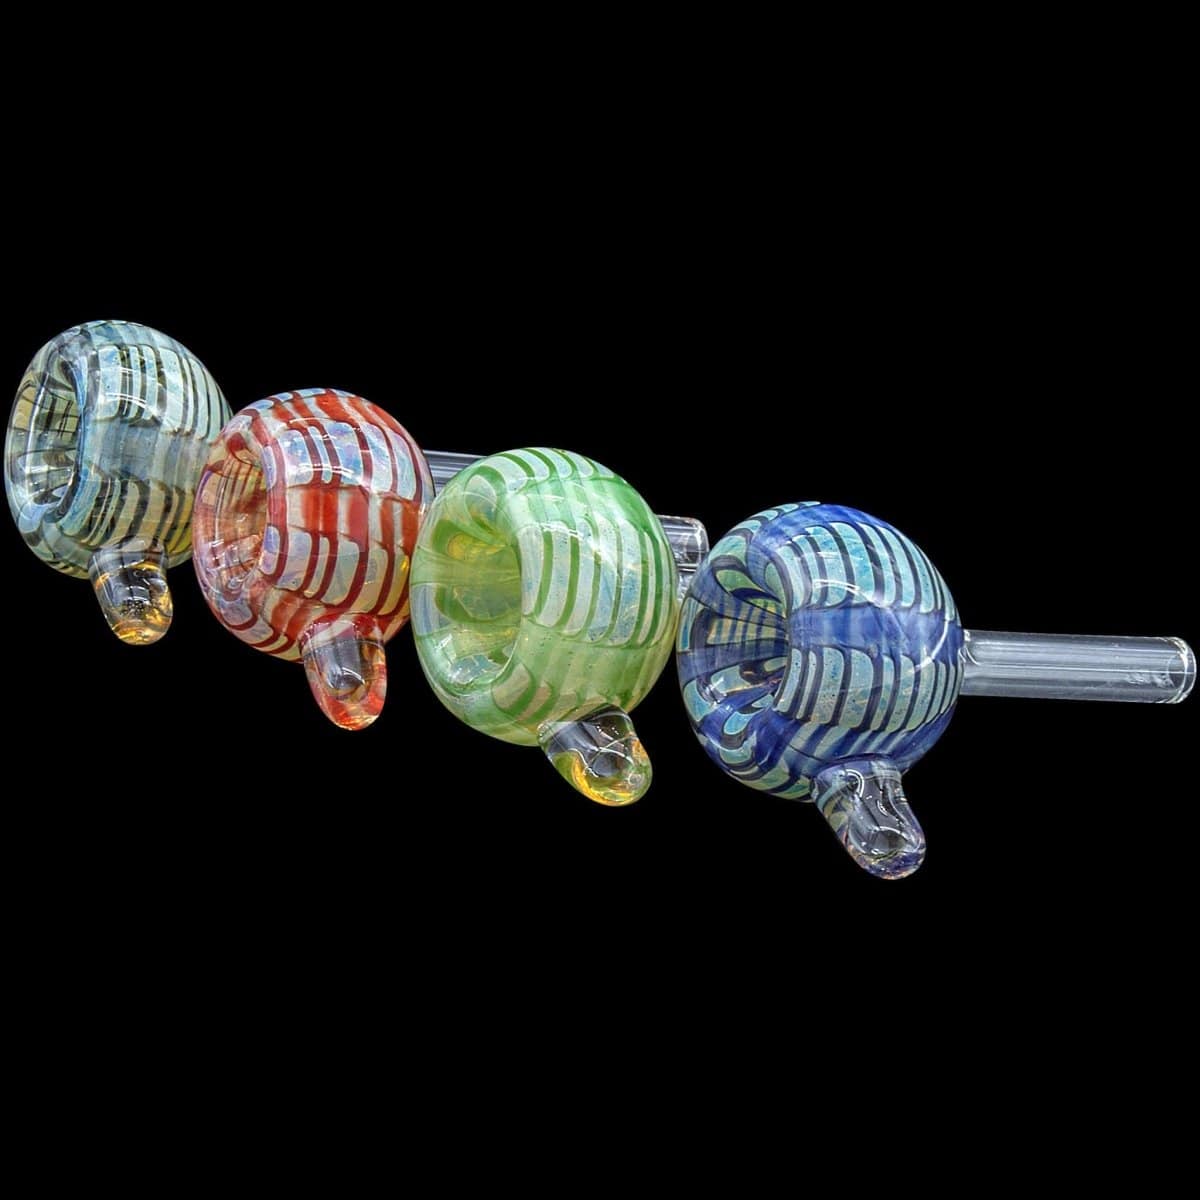 LA Pipes Smoking Accessory Color Raked Bubble Pull-Stem 9mm Slide Bowl